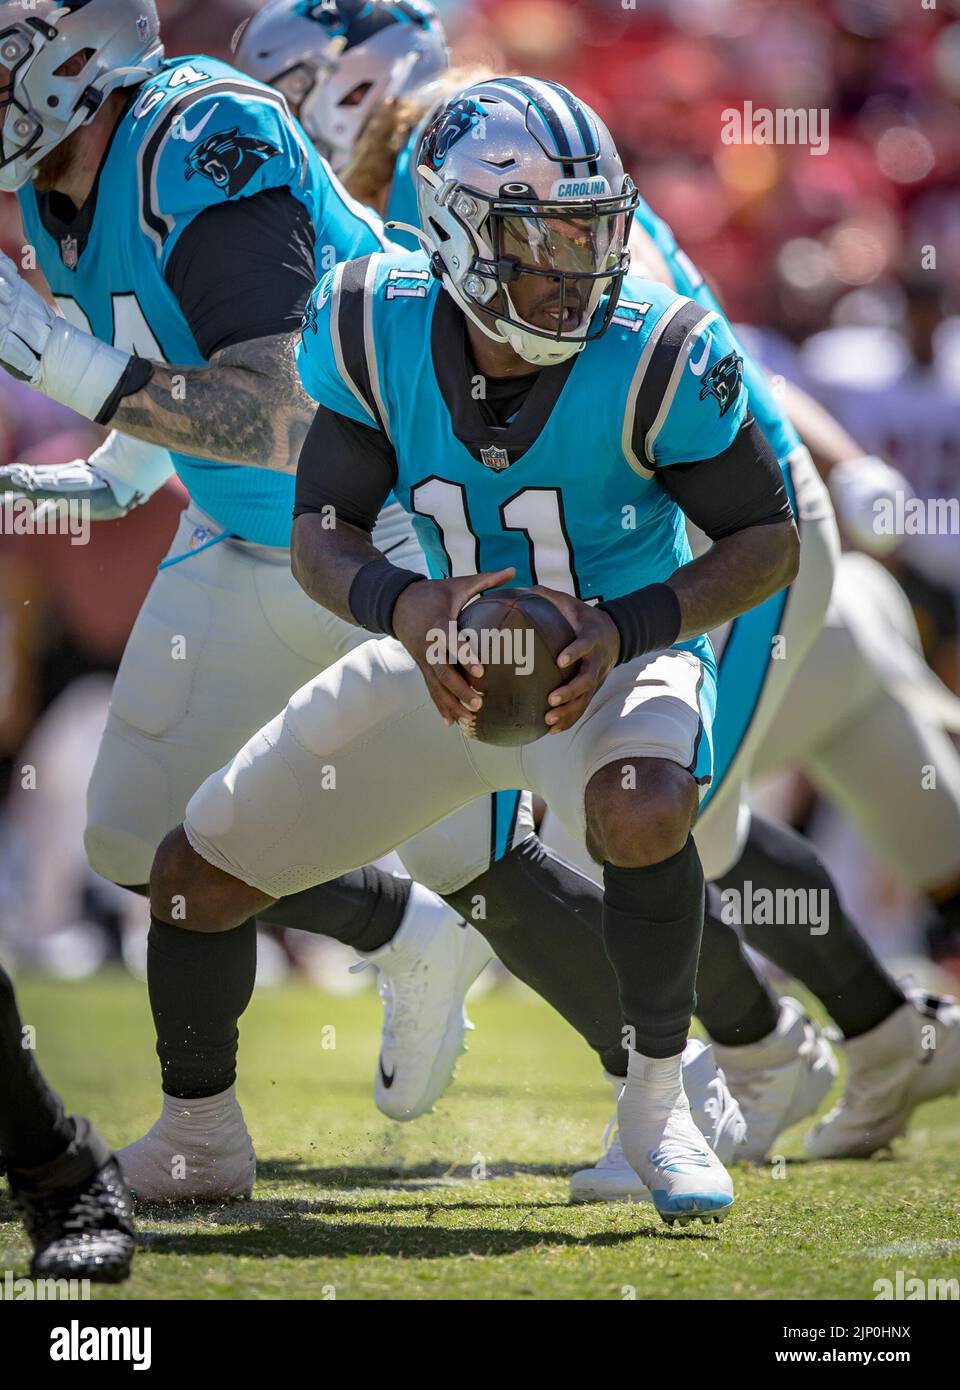 August 13, 2022 : Carolina Panthers quarterback PJ Walker (11) drops back during the preseason game between the Carolina Panthers and Washington Commanders played at Fed Ex Field in Landover, MD. Photographer: Cory Royster Stock Photo